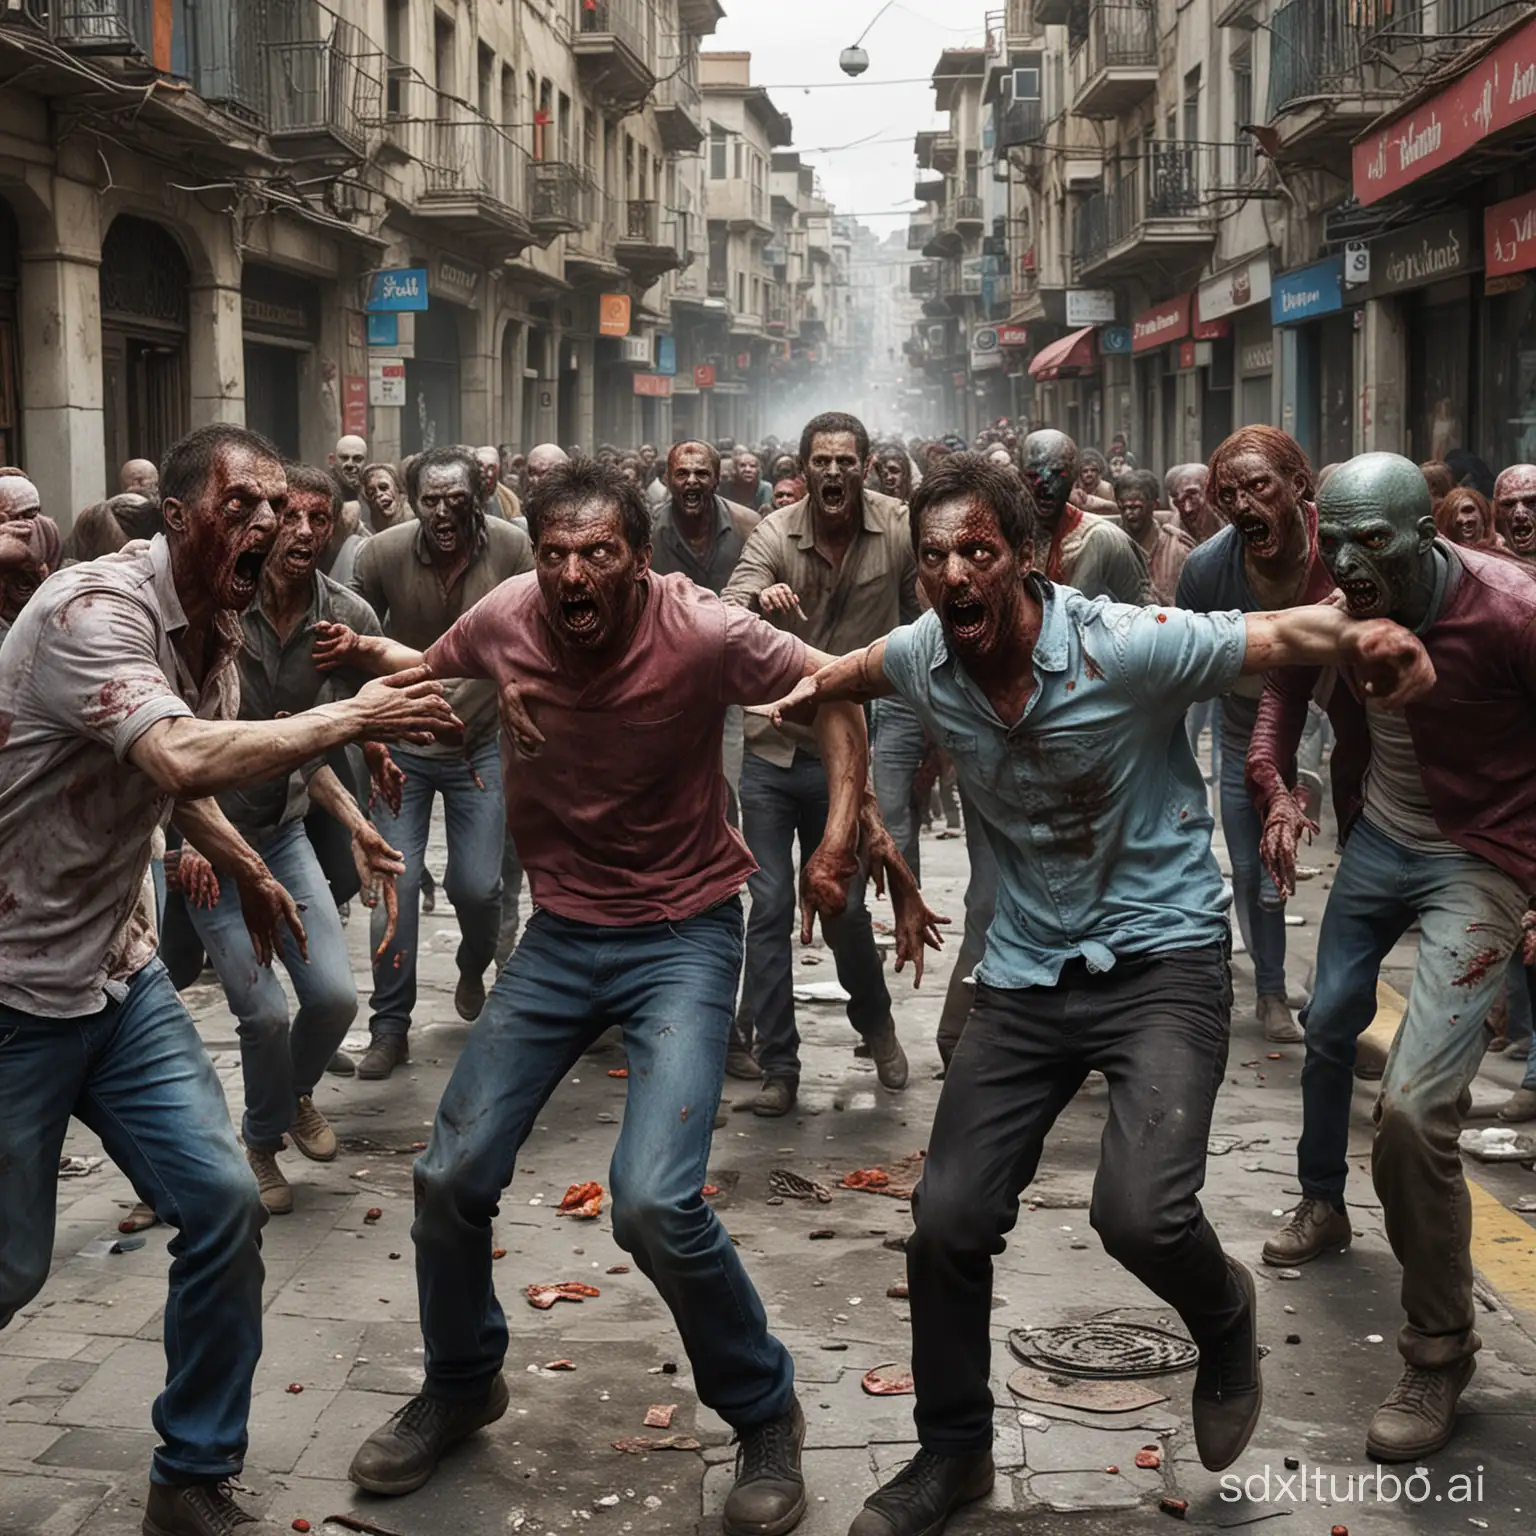 Draw a realistic and colorful picture of zombies attacking people in the streets of Istanbul.